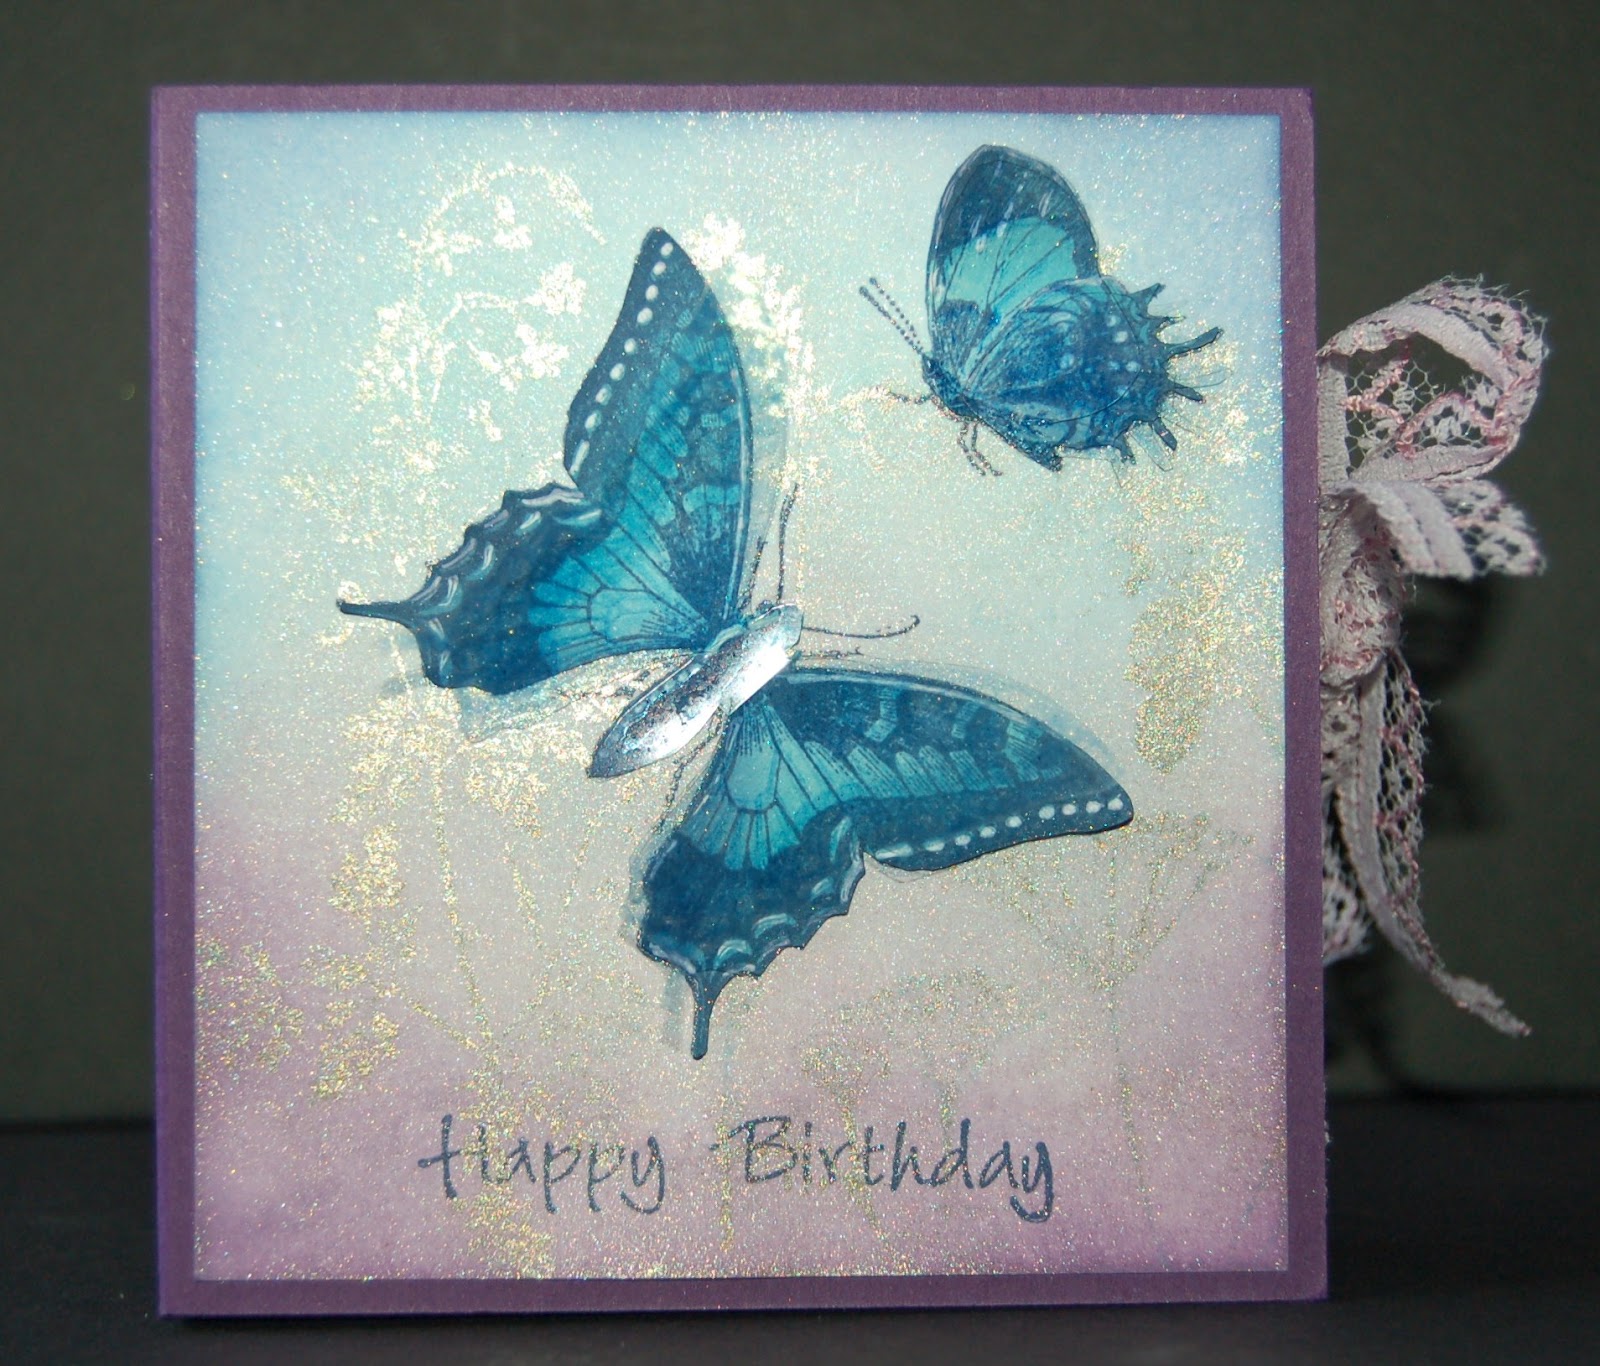 Izzwizz Creations: Butterfly birthday - a pretty book card for a 17 year old girl